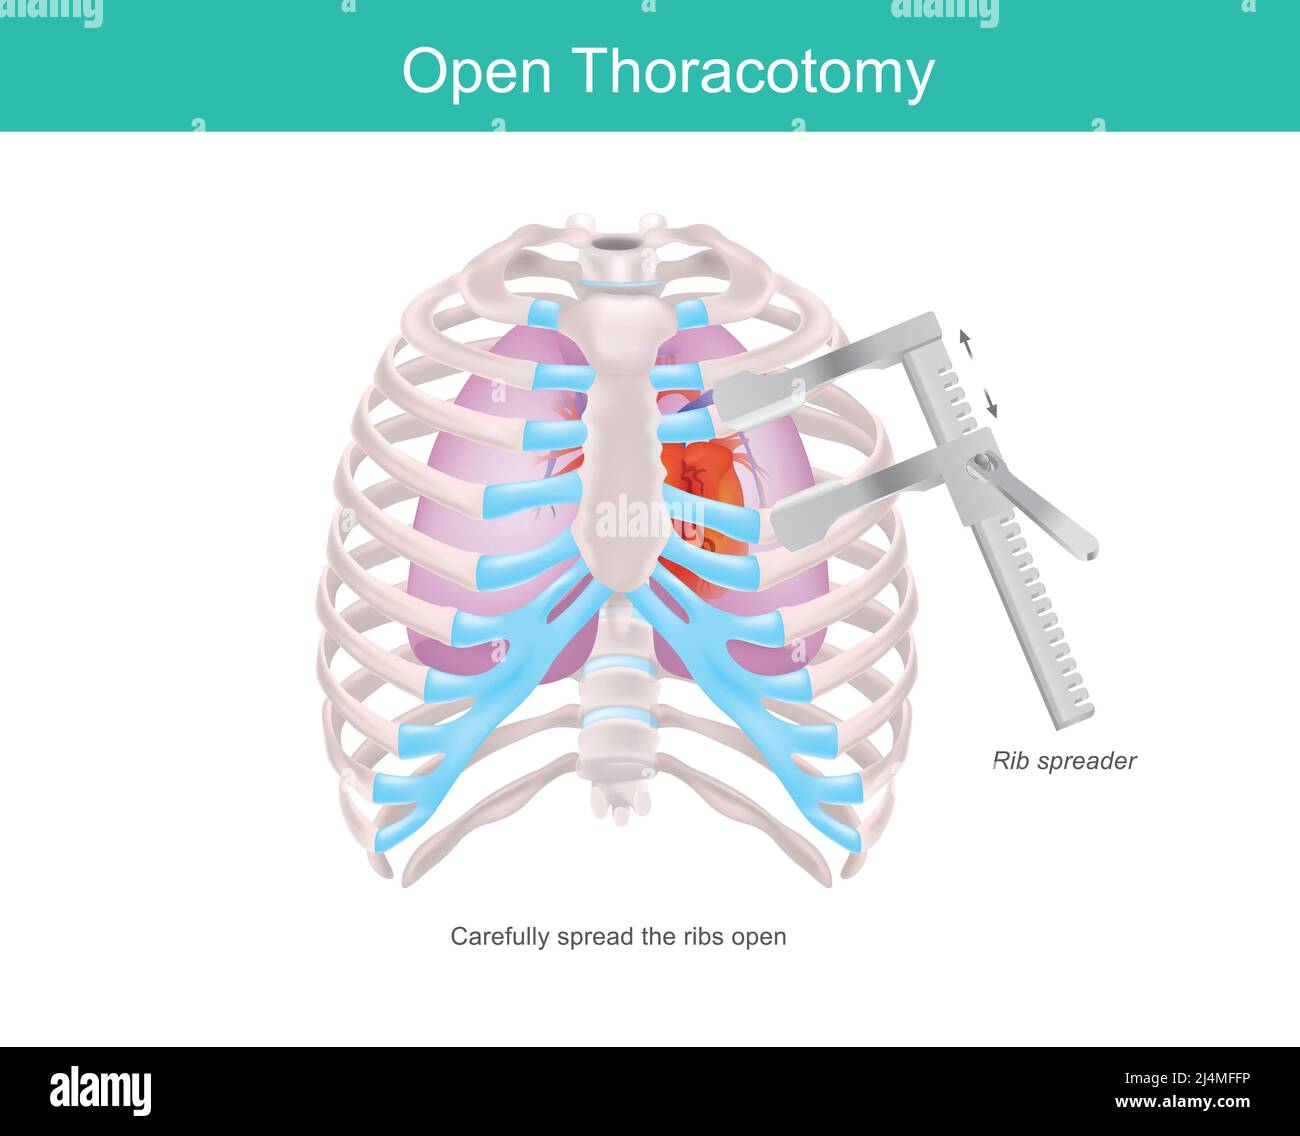 Open Thoracotomy. A procedure to gain access into the pleural space of the human chest by medical tool called Rib spreader. Stock Vector